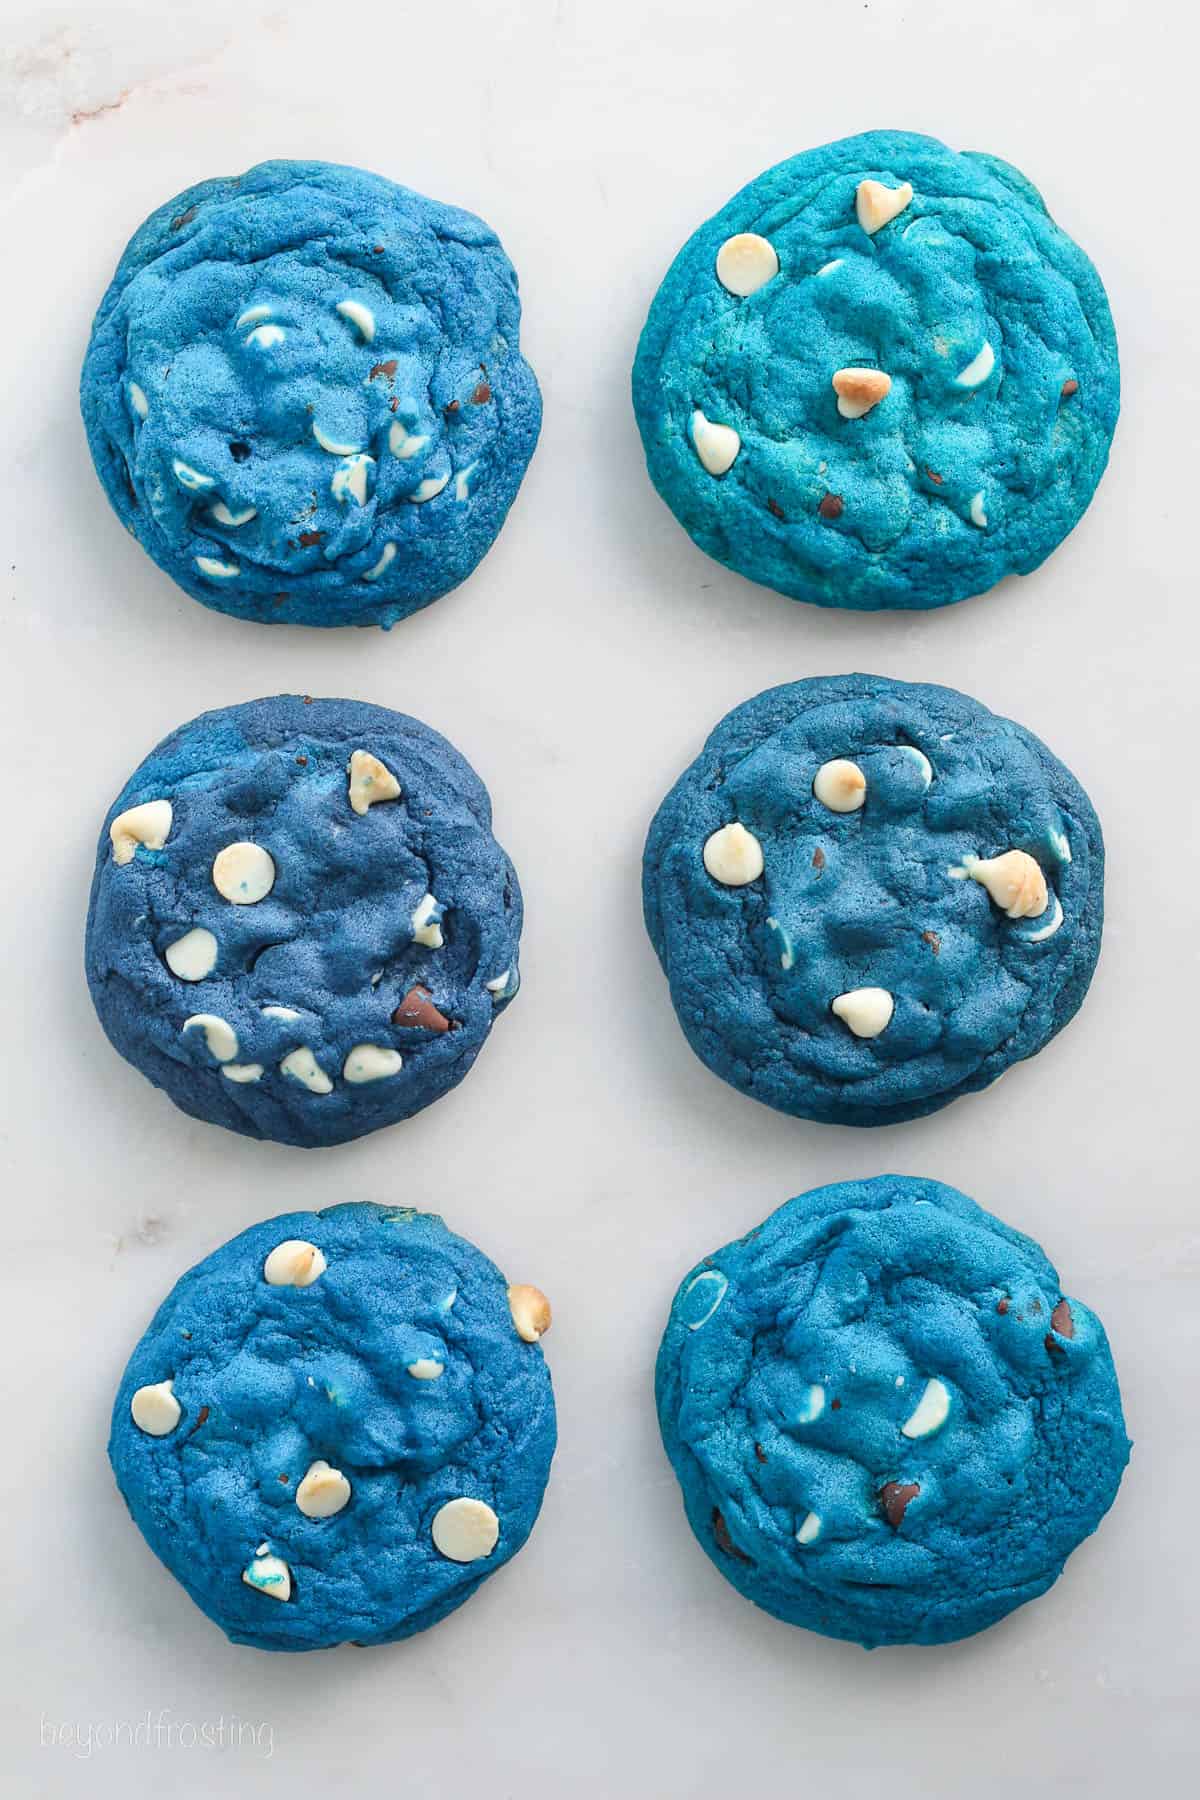 Six chocolate chip cookies dyed various shades of blue using gel food coloring.